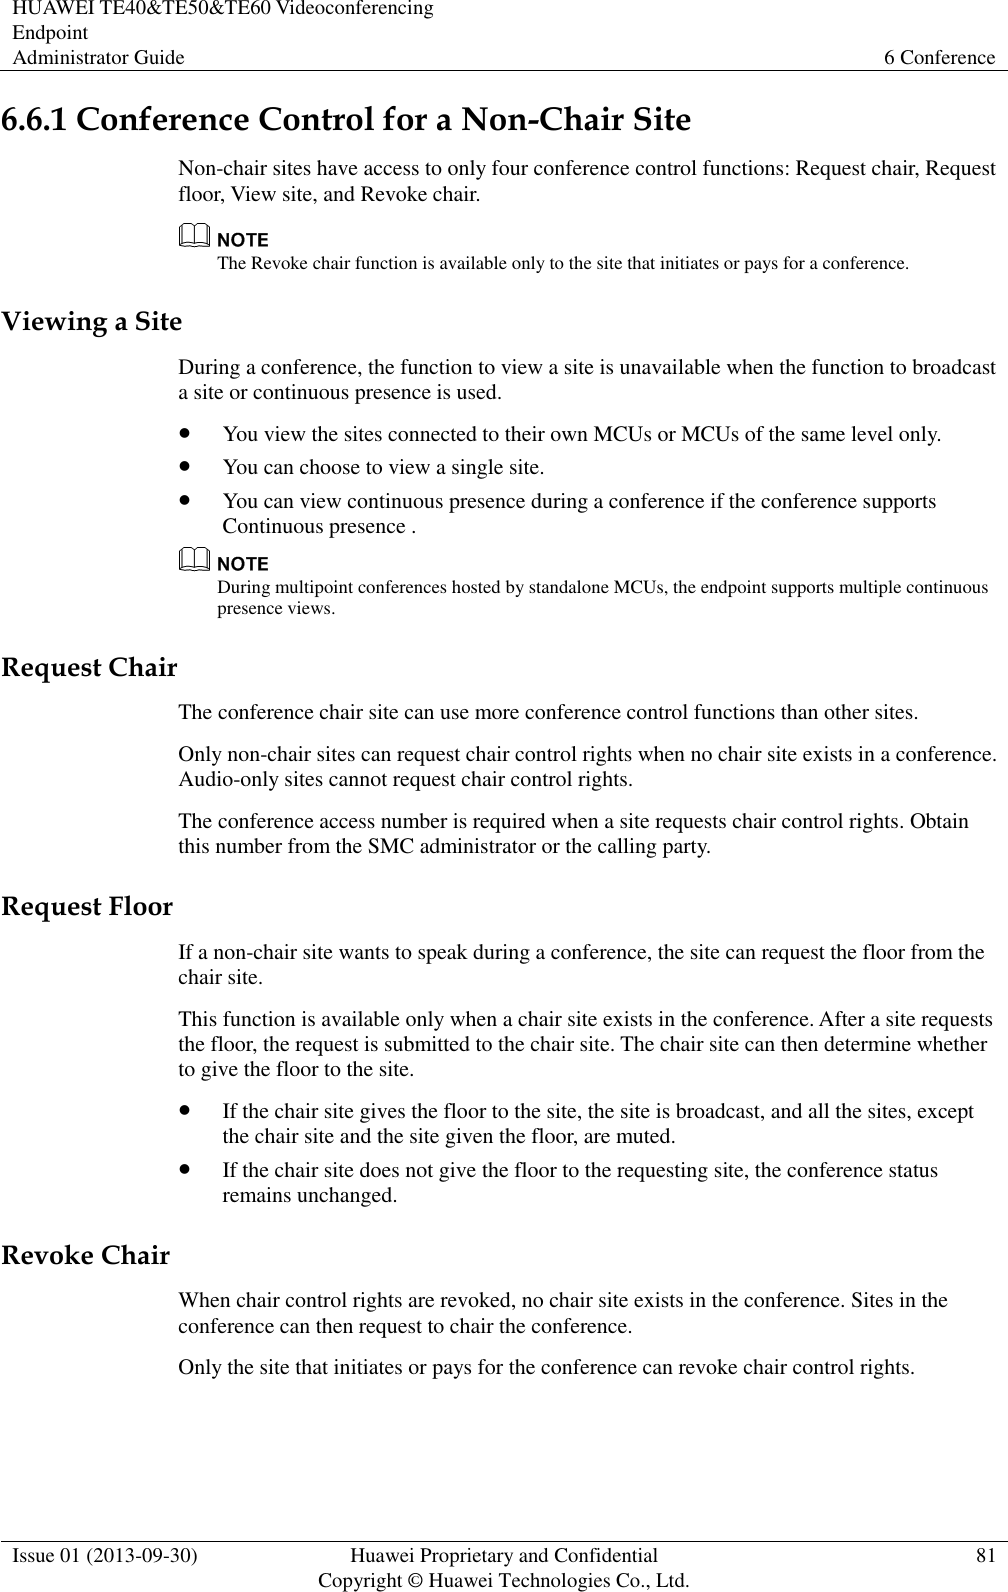 HUAWEI TE40&amp;TE50&amp;TE60 Videoconferencing Endpoint Administrator Guide 6 Conference  Issue 01 (2013-09-30) Huawei Proprietary and Confidential                                     Copyright © Huawei Technologies Co., Ltd. 81  6.6.1 Conference Control for a Non-Chair Site Non-chair sites have access to only four conference control functions: Request chair, Request floor, View site, and Revoke chair.  The Revoke chair function is available only to the site that initiates or pays for a conference. Viewing a Site During a conference, the function to view a site is unavailable when the function to broadcast a site or continuous presence is used.  You view the sites connected to their own MCUs or MCUs of the same level only.  You can choose to view a single site.  You can view continuous presence during a conference if the conference supports Continuous presence .  During multipoint conferences hosted by standalone MCUs, the endpoint supports multiple continuous presence views. Request Chair The conference chair site can use more conference control functions than other sites. Only non-chair sites can request chair control rights when no chair site exists in a conference. Audio-only sites cannot request chair control rights. The conference access number is required when a site requests chair control rights. Obtain this number from the SMC administrator or the calling party. Request Floor If a non-chair site wants to speak during a conference, the site can request the floor from the chair site. This function is available only when a chair site exists in the conference. After a site requests the floor, the request is submitted to the chair site. The chair site can then determine whether to give the floor to the site.  If the chair site gives the floor to the site, the site is broadcast, and all the sites, except the chair site and the site given the floor, are muted.  If the chair site does not give the floor to the requesting site, the conference status remains unchanged. Revoke Chair When chair control rights are revoked, no chair site exists in the conference. Sites in the conference can then request to chair the conference. Only the site that initiates or pays for the conference can revoke chair control rights. 